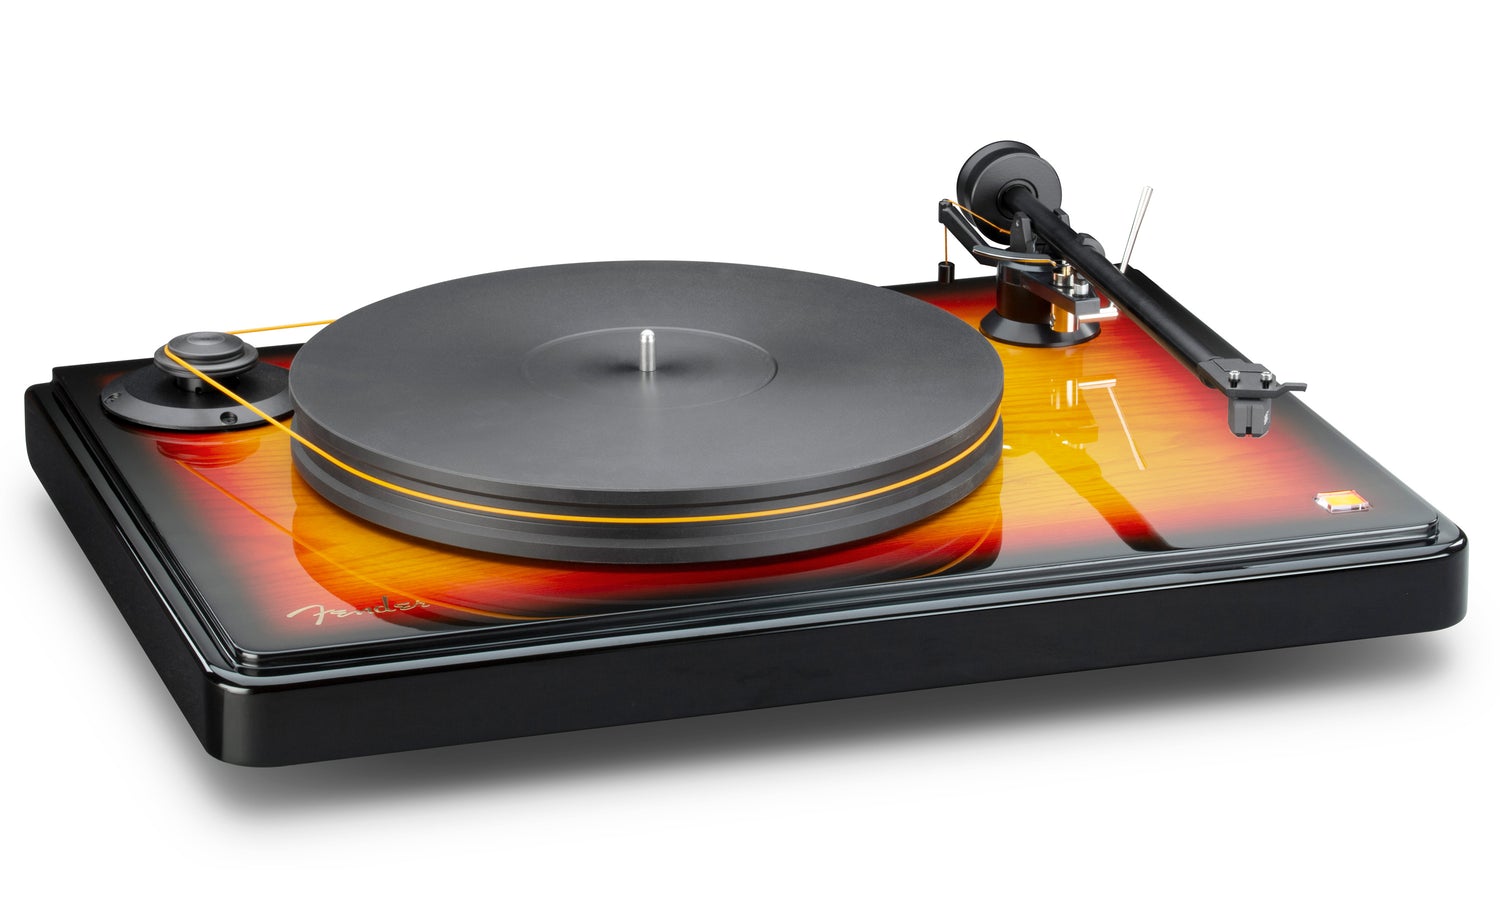 MOBILE FIDELITY FENDER PRECISIONDECK LIMITED EDITION TURNTABLE